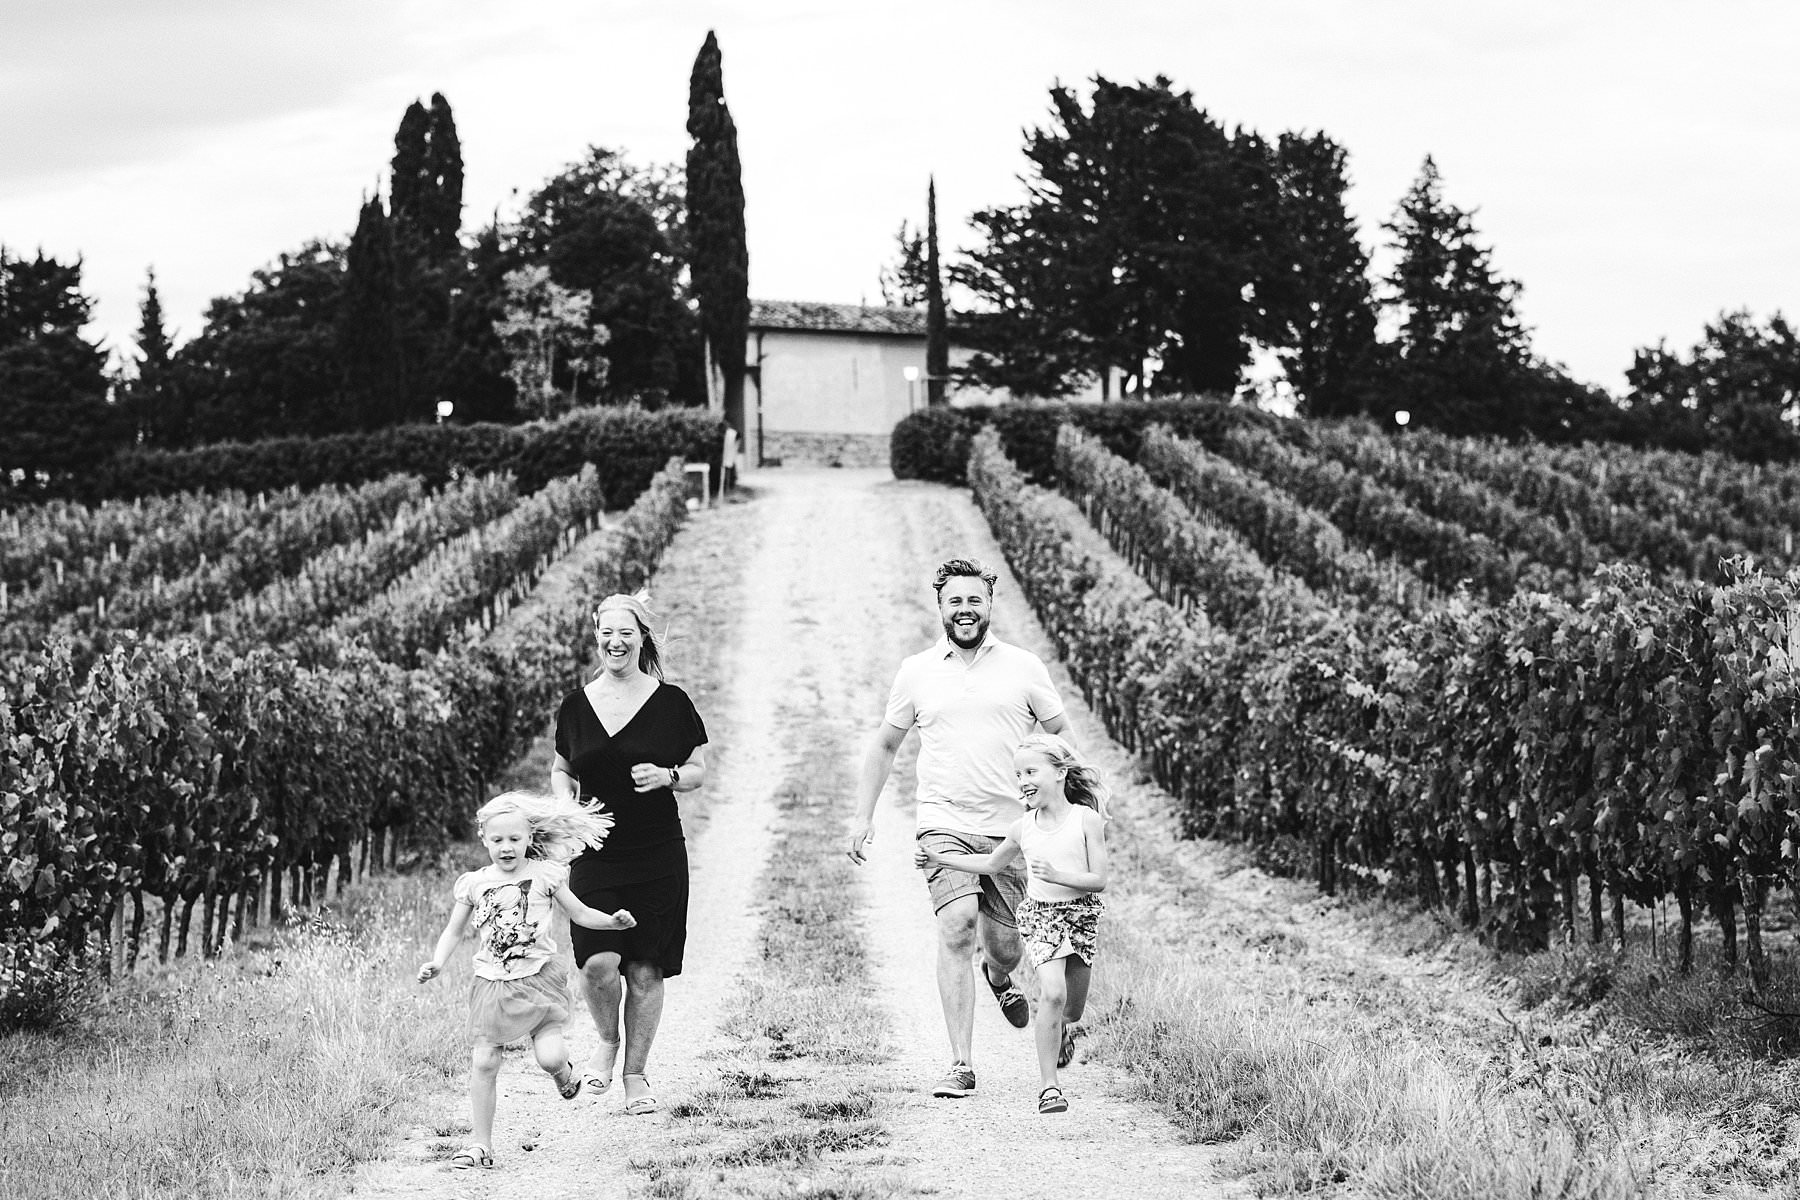 Exciting family photo shoot in Tuscany countryside into a typical and evocative vineyard just outside Peccioli town